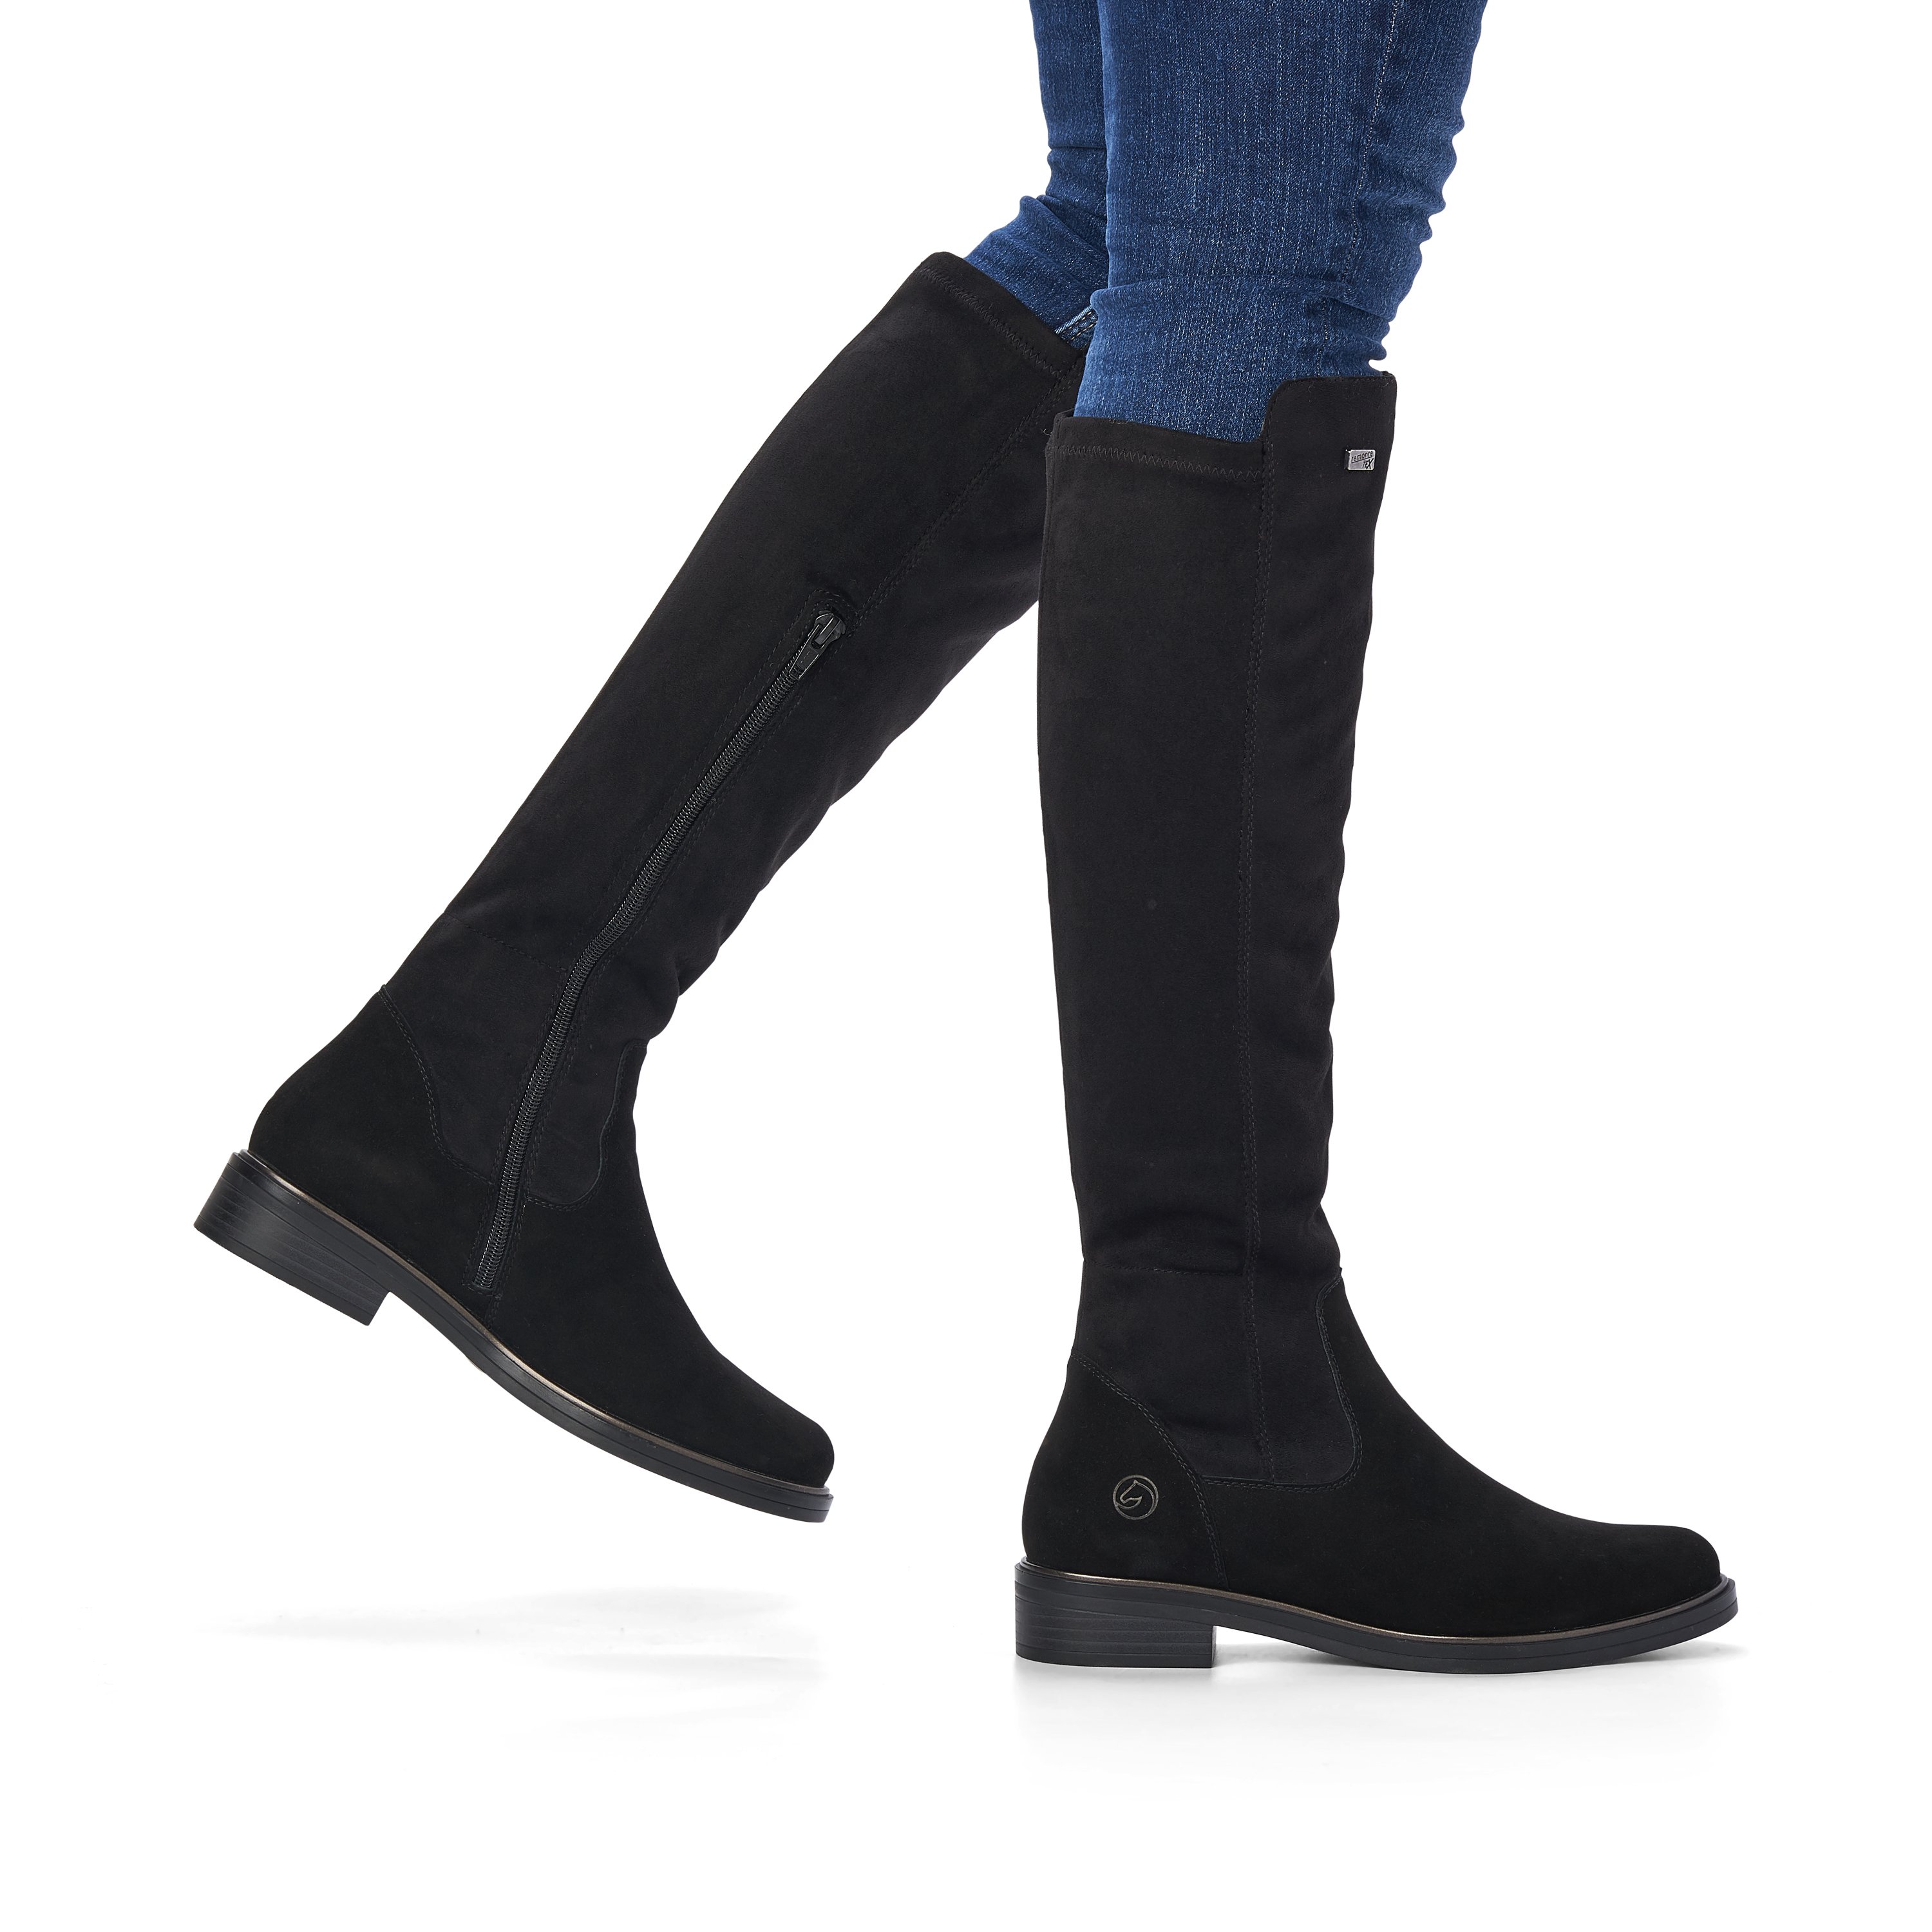 Jet black remonte women´s high boots D8387-02 with cushioning profile sole. Shoe on foot